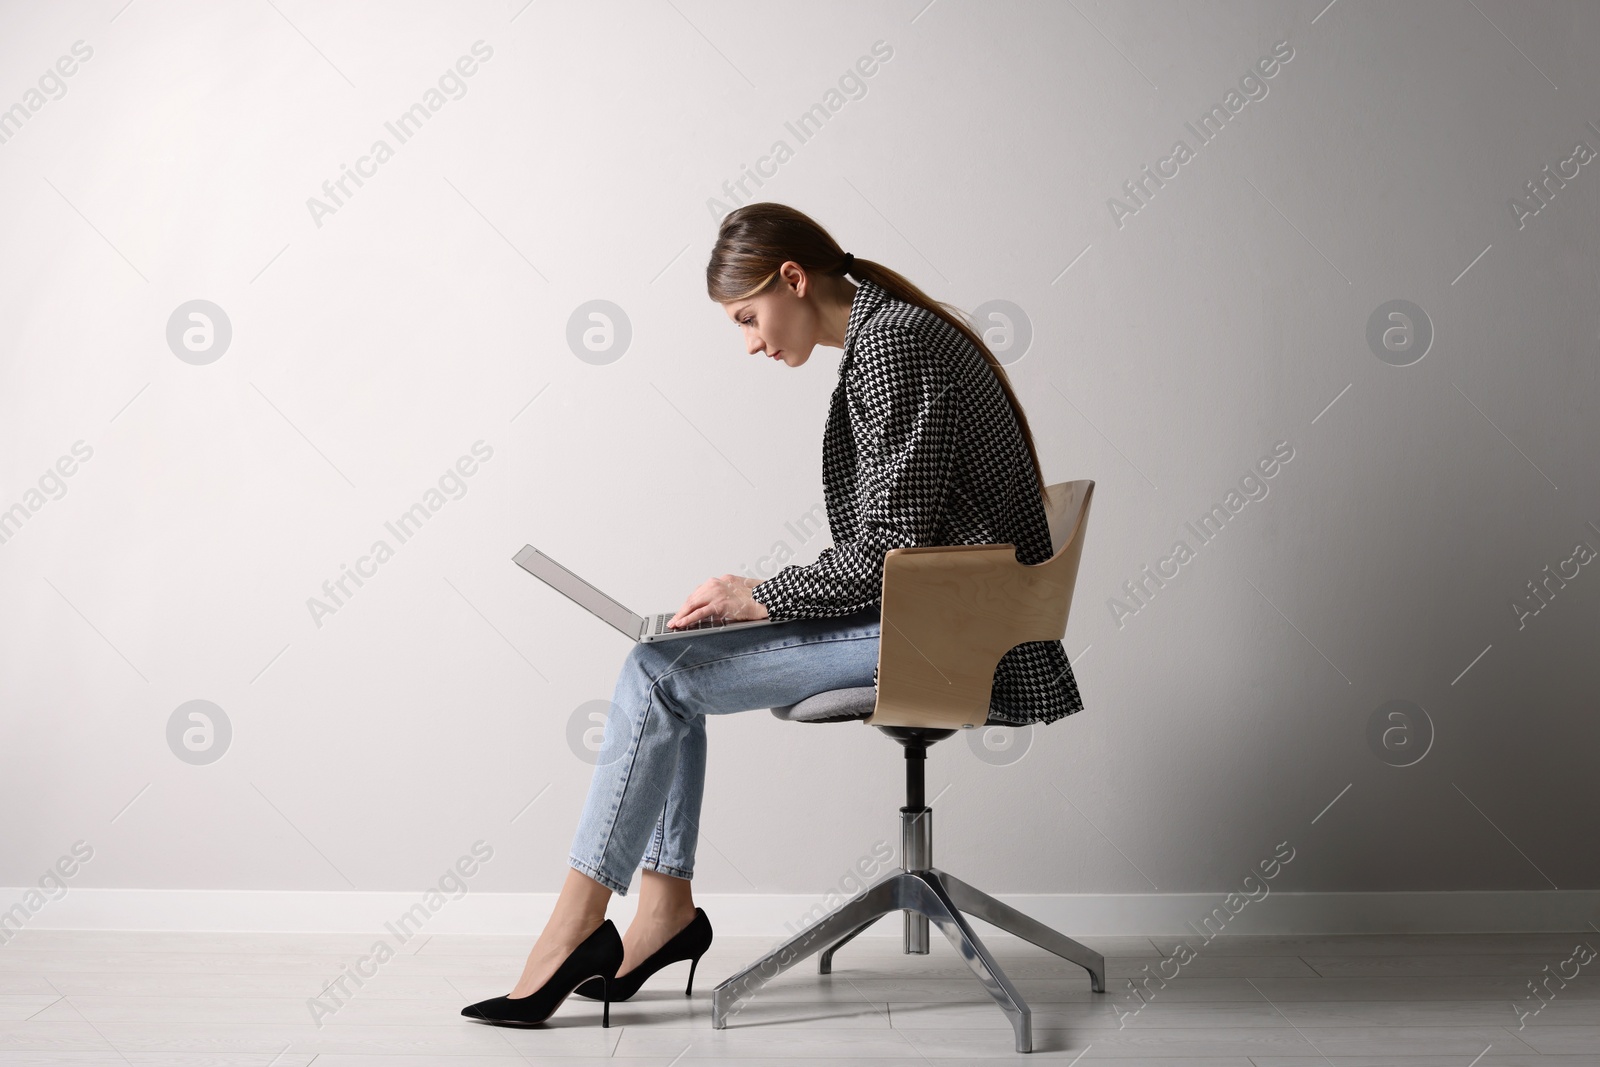 Photo of Woman with bad posture using laptop while sitting on chair near light grey wall indoors